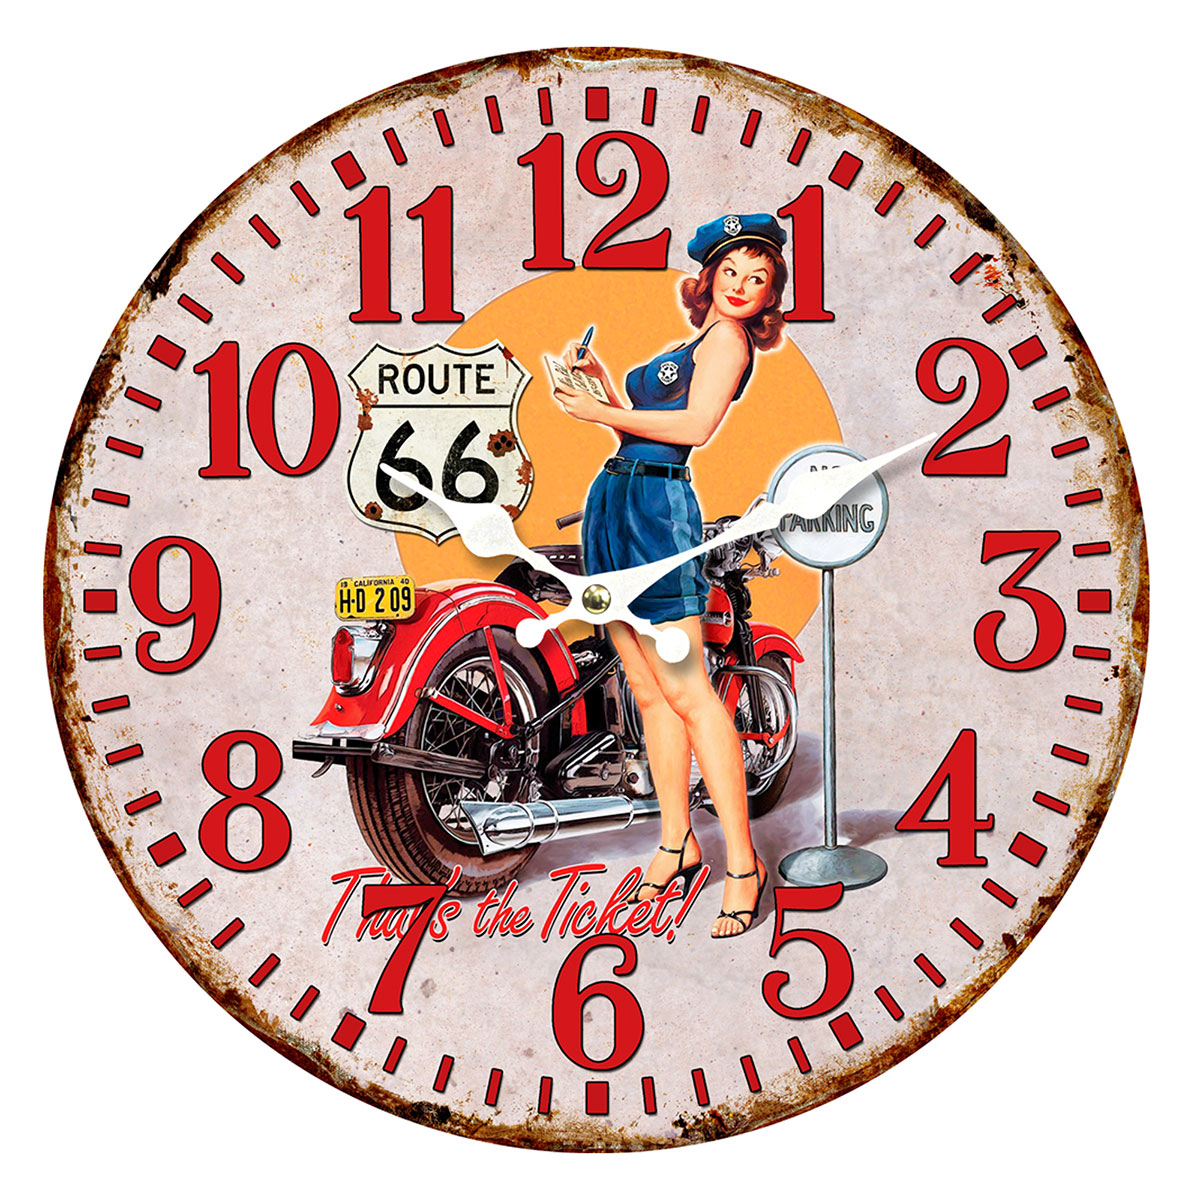 Horloge pin up police route 66